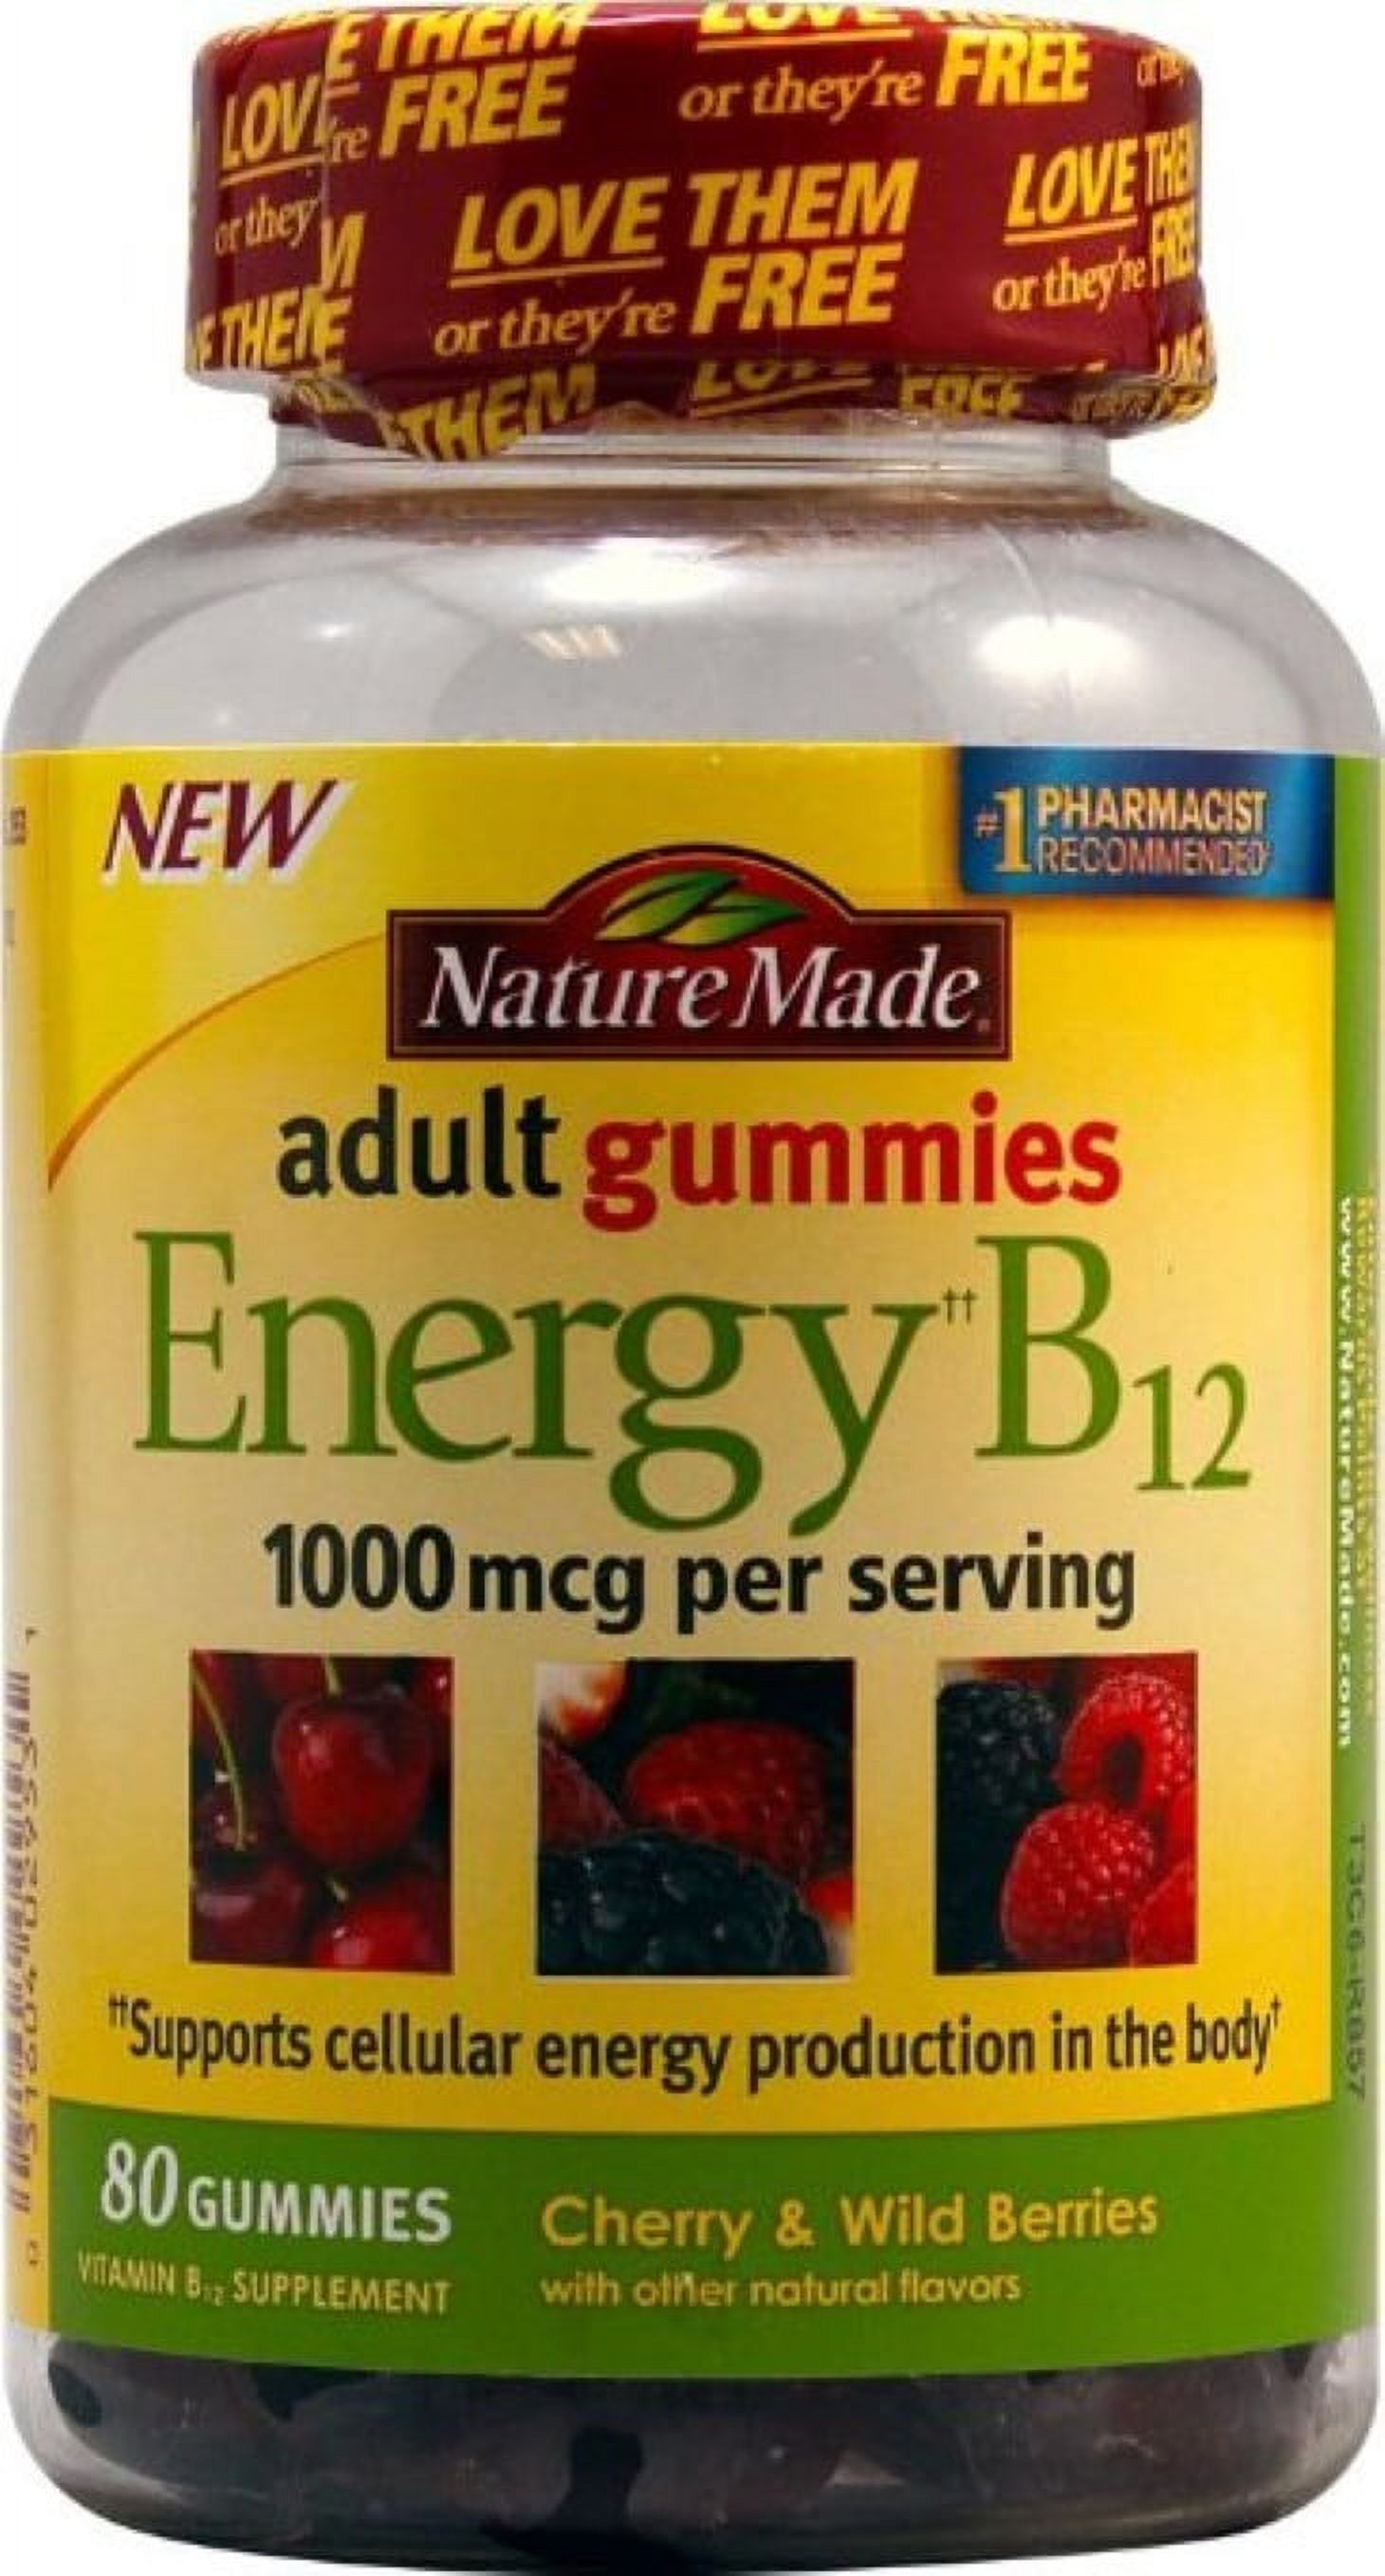 Nature Made Energy B-12 Adult Gummies, Cherry & Wild Berries 80 ea (Pack of 3) - image 1 of 2